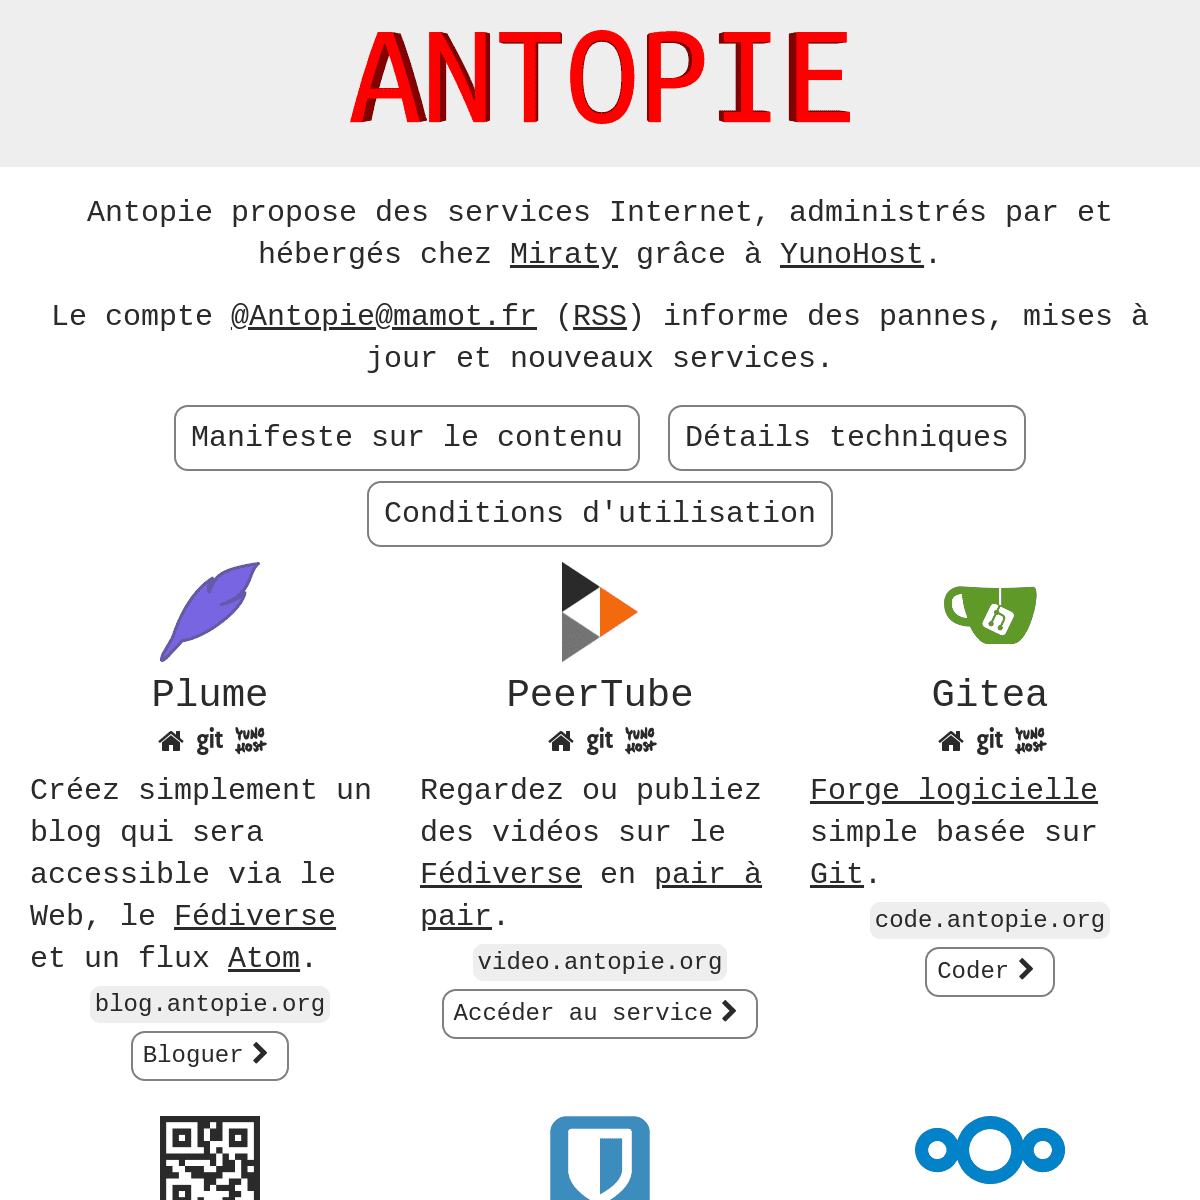 A complete backup of https://antopie.org